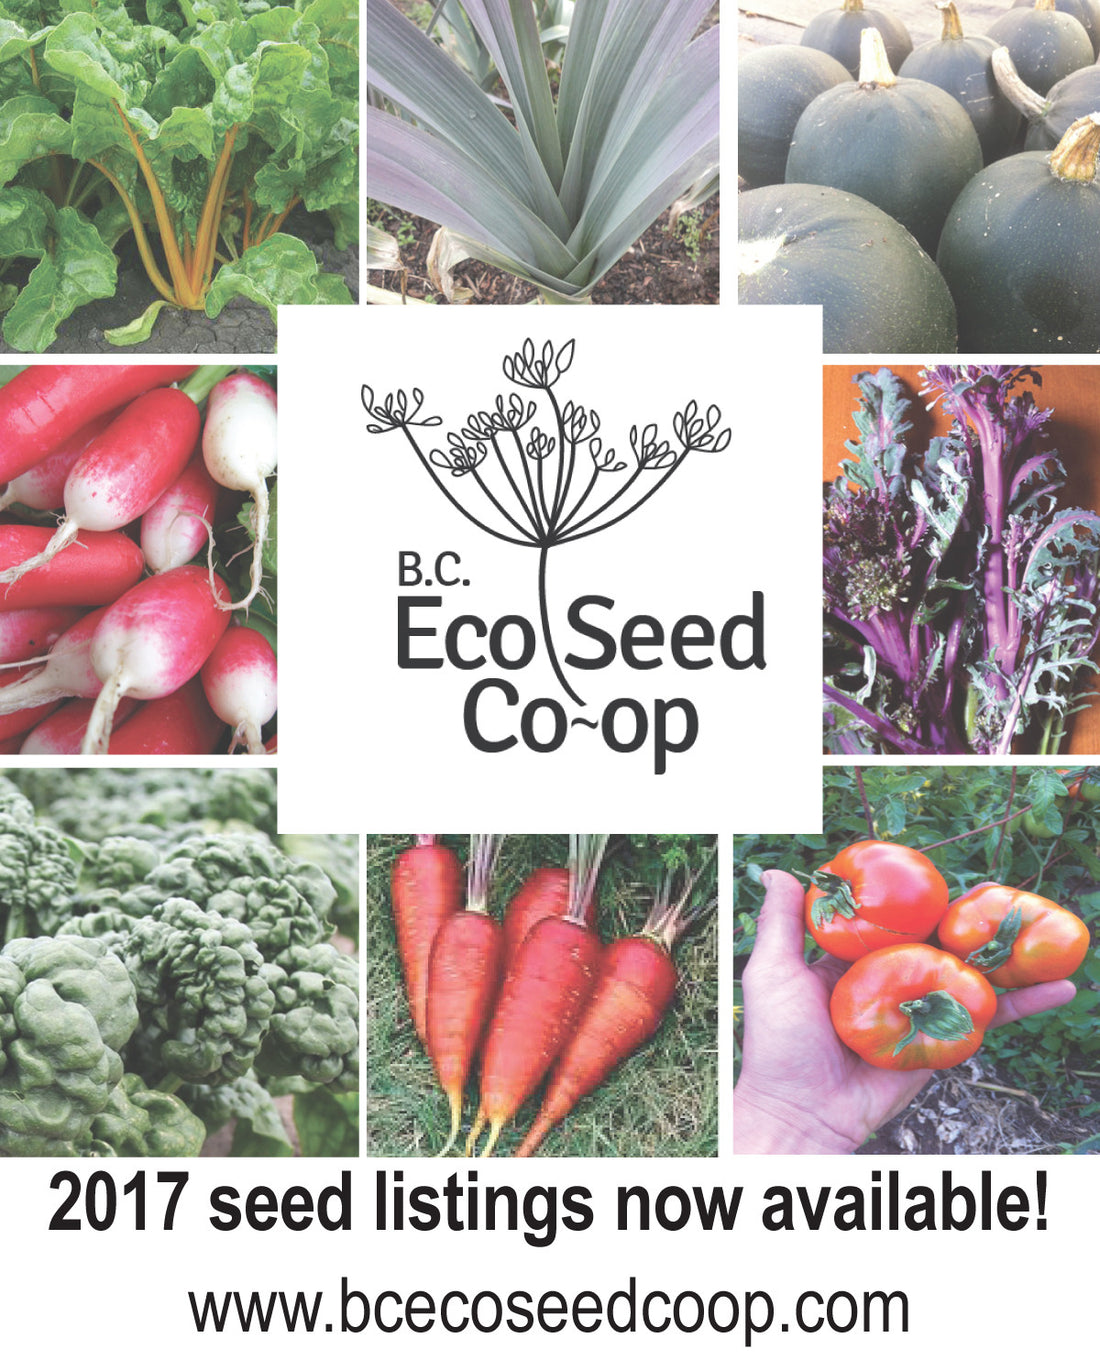 Our 2017 Seed Listings Are Online!